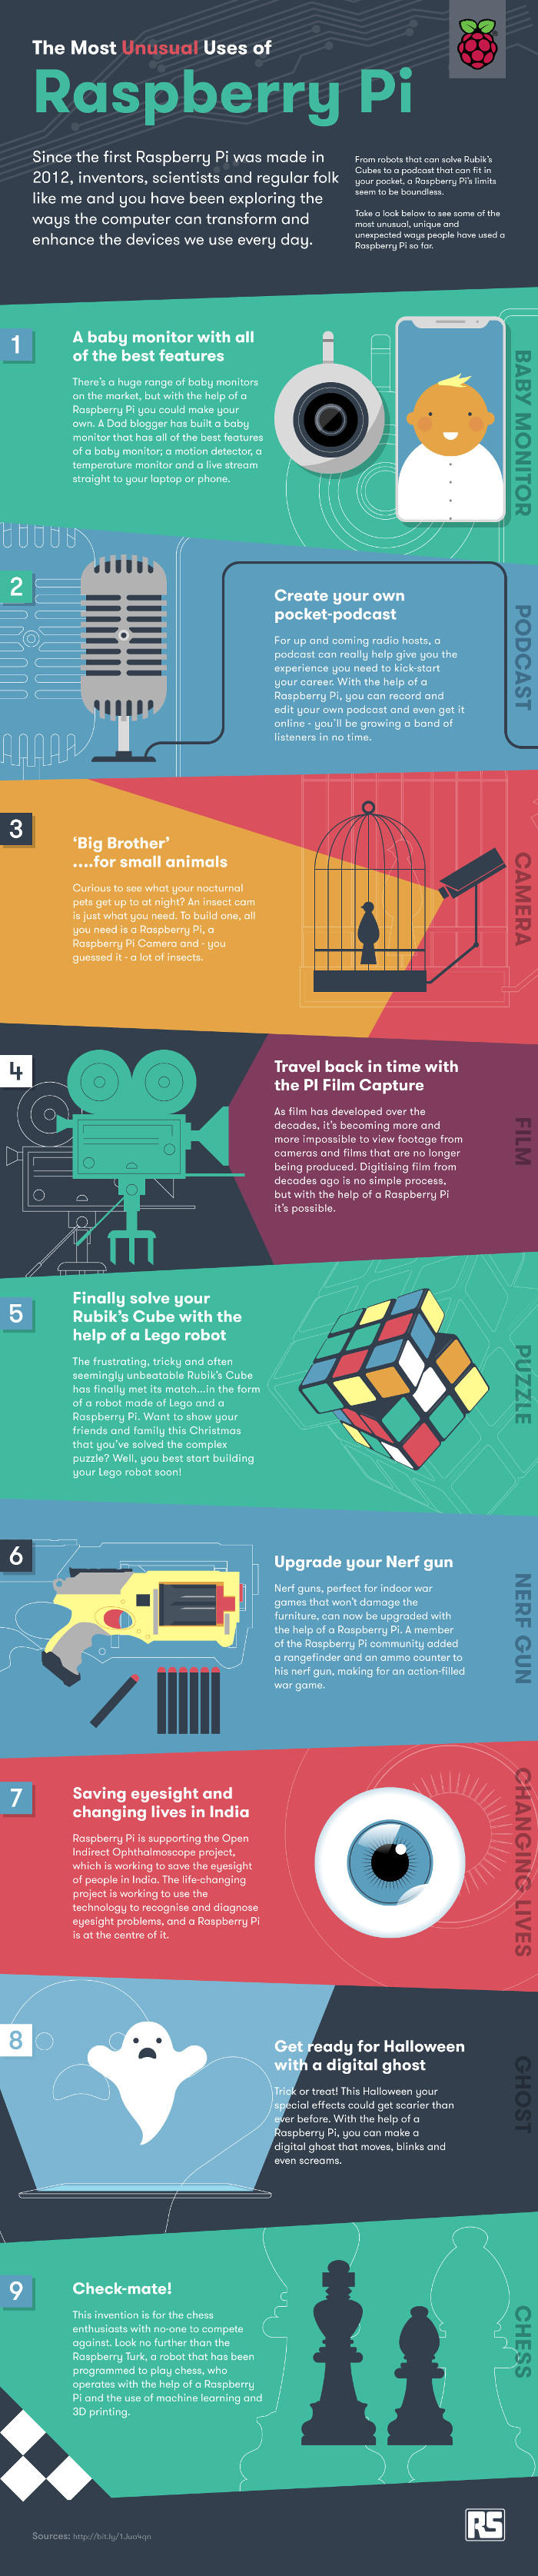 The Most Unusual Uses for the Raspberry Pi Infographic